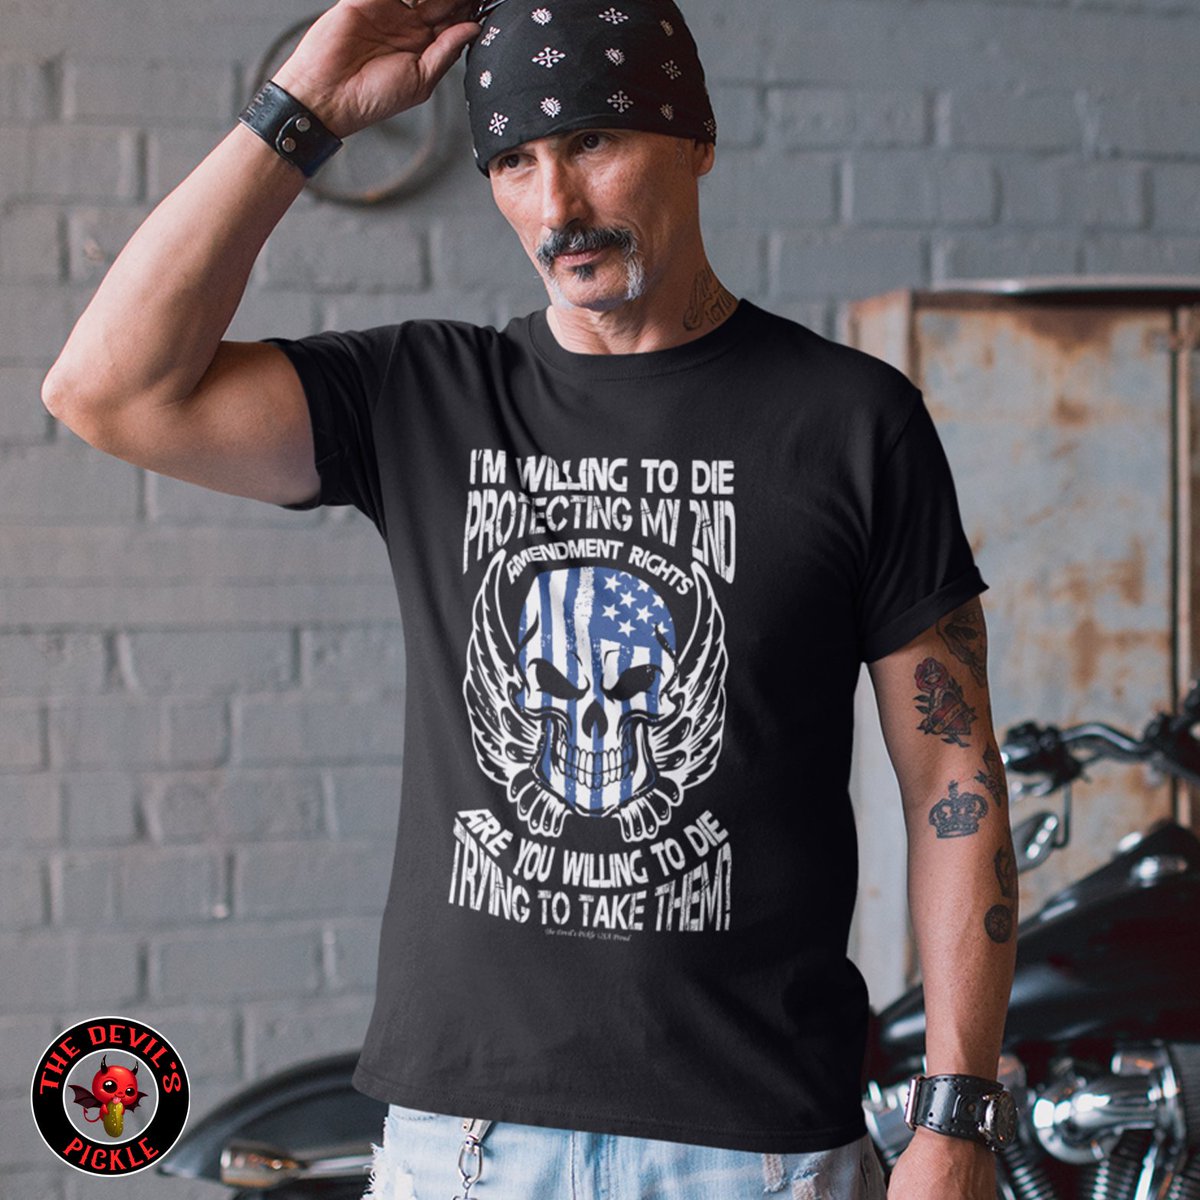 Locked and Loaded Protecting My 2nd Amendment Rights Tee! Ready to defend my style and freedom. Patriotic American Tees, Sweatshirts and Hoodies Available at  The Devil's Pickle.

 #americanpride #freeshipping  #USA #funnyapparel  #patriot #hellyeahamerica #2ndamendment